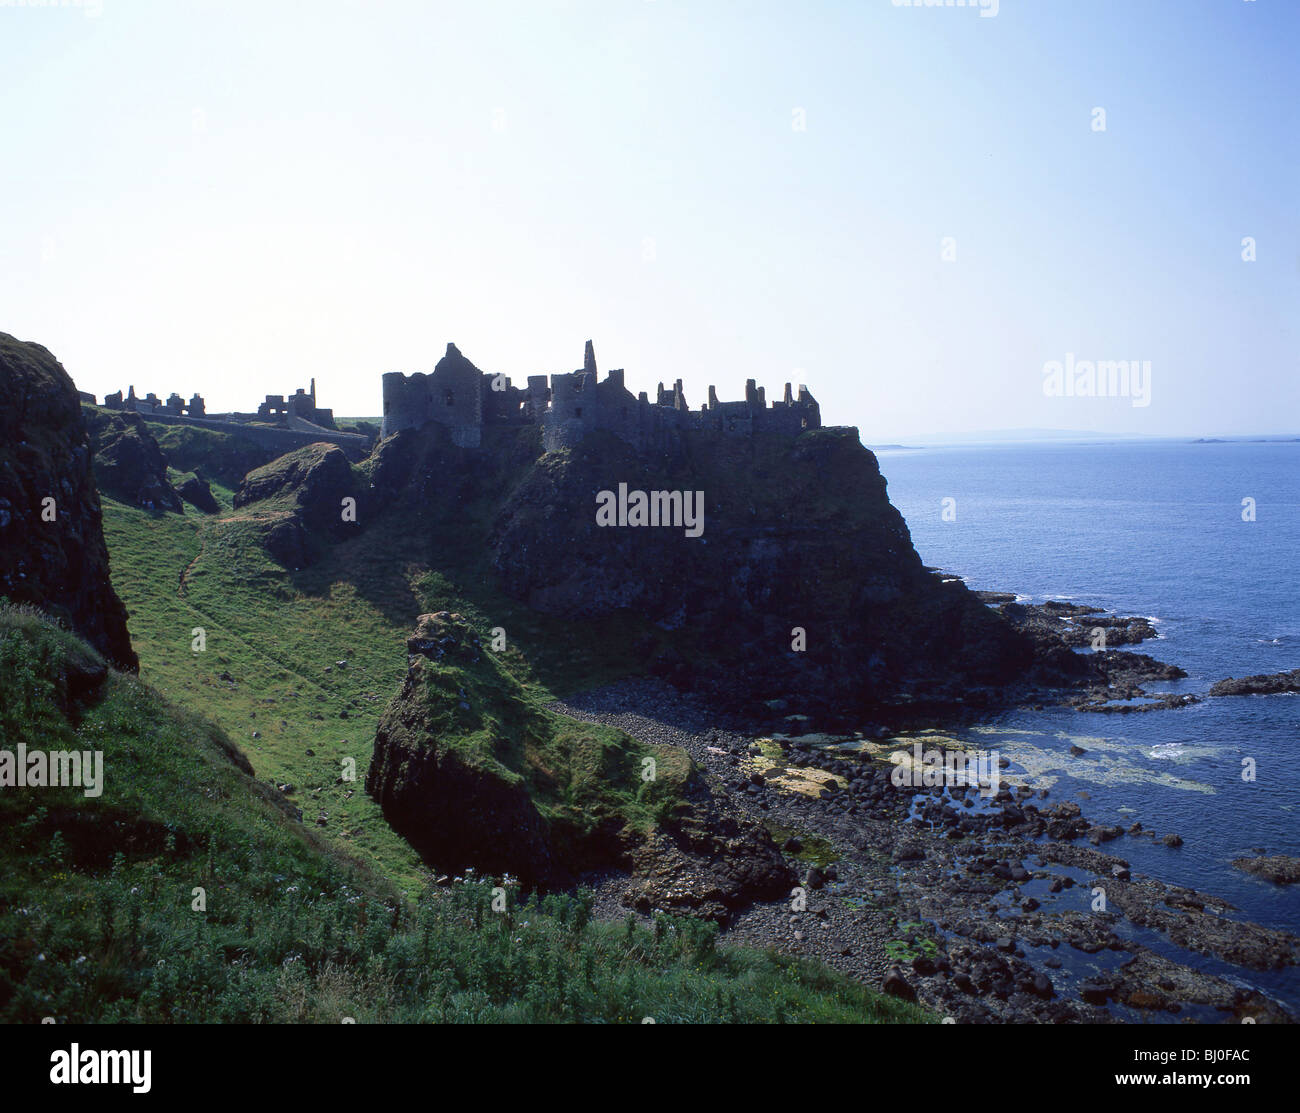 View of castle and sea, Dunluce Castle, County Antrim, Northern Ireland, United Kingdom Stock Photo